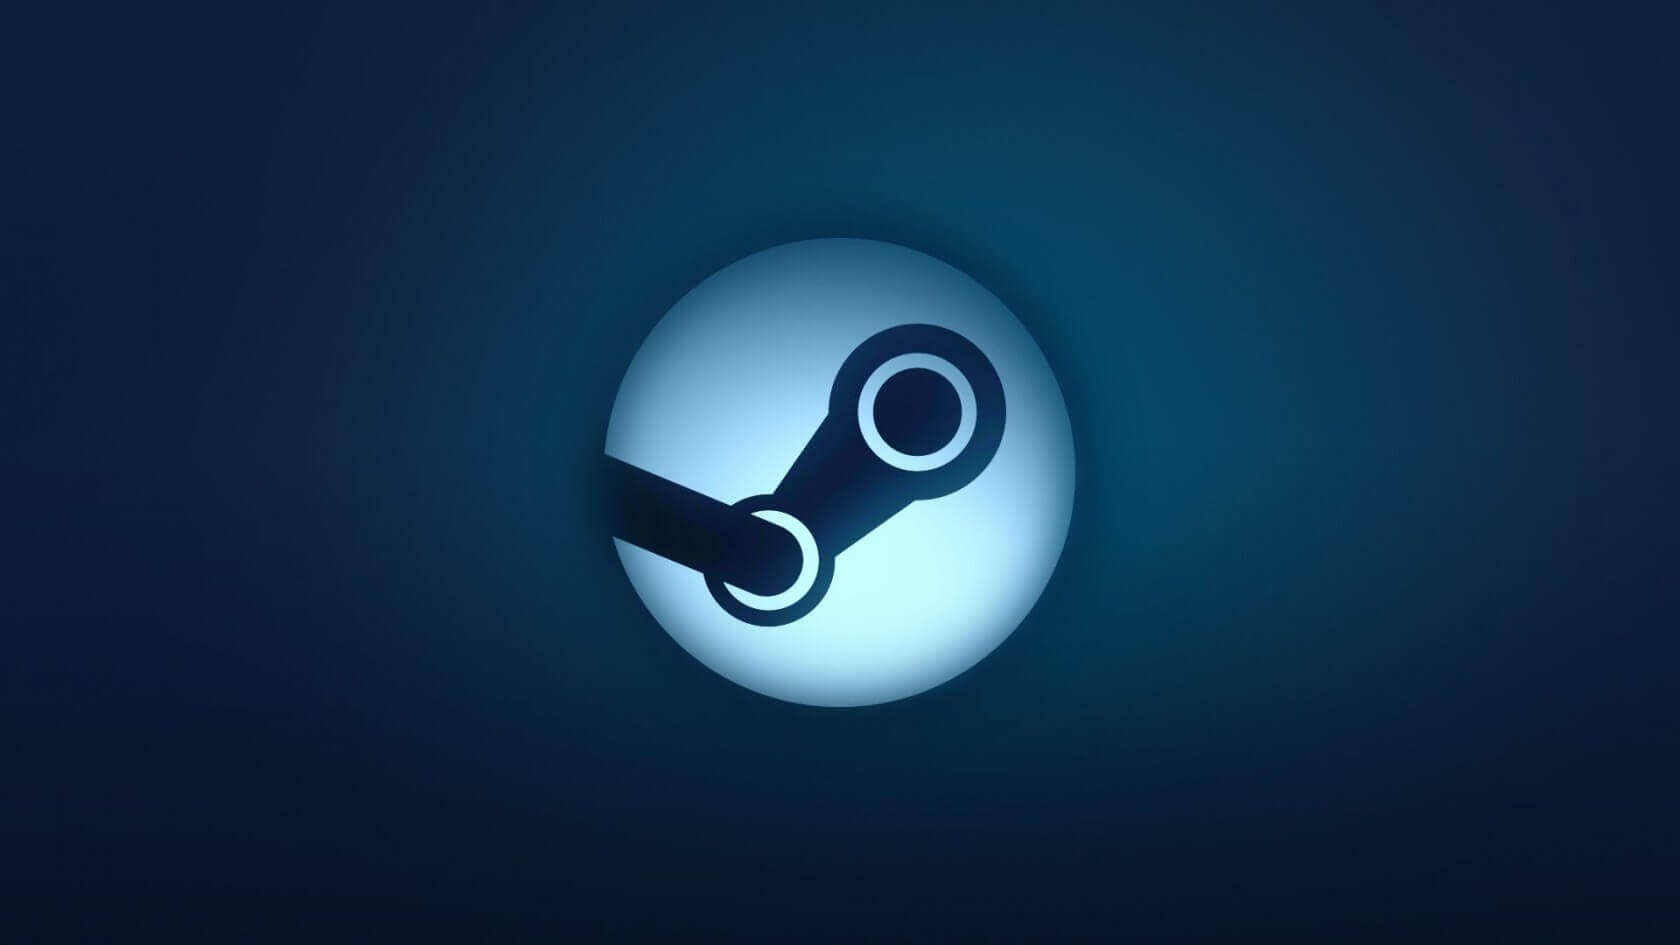 June Steam survey: RTX 3060 moves into second place, Windows 11 closes the gap on Windows 10